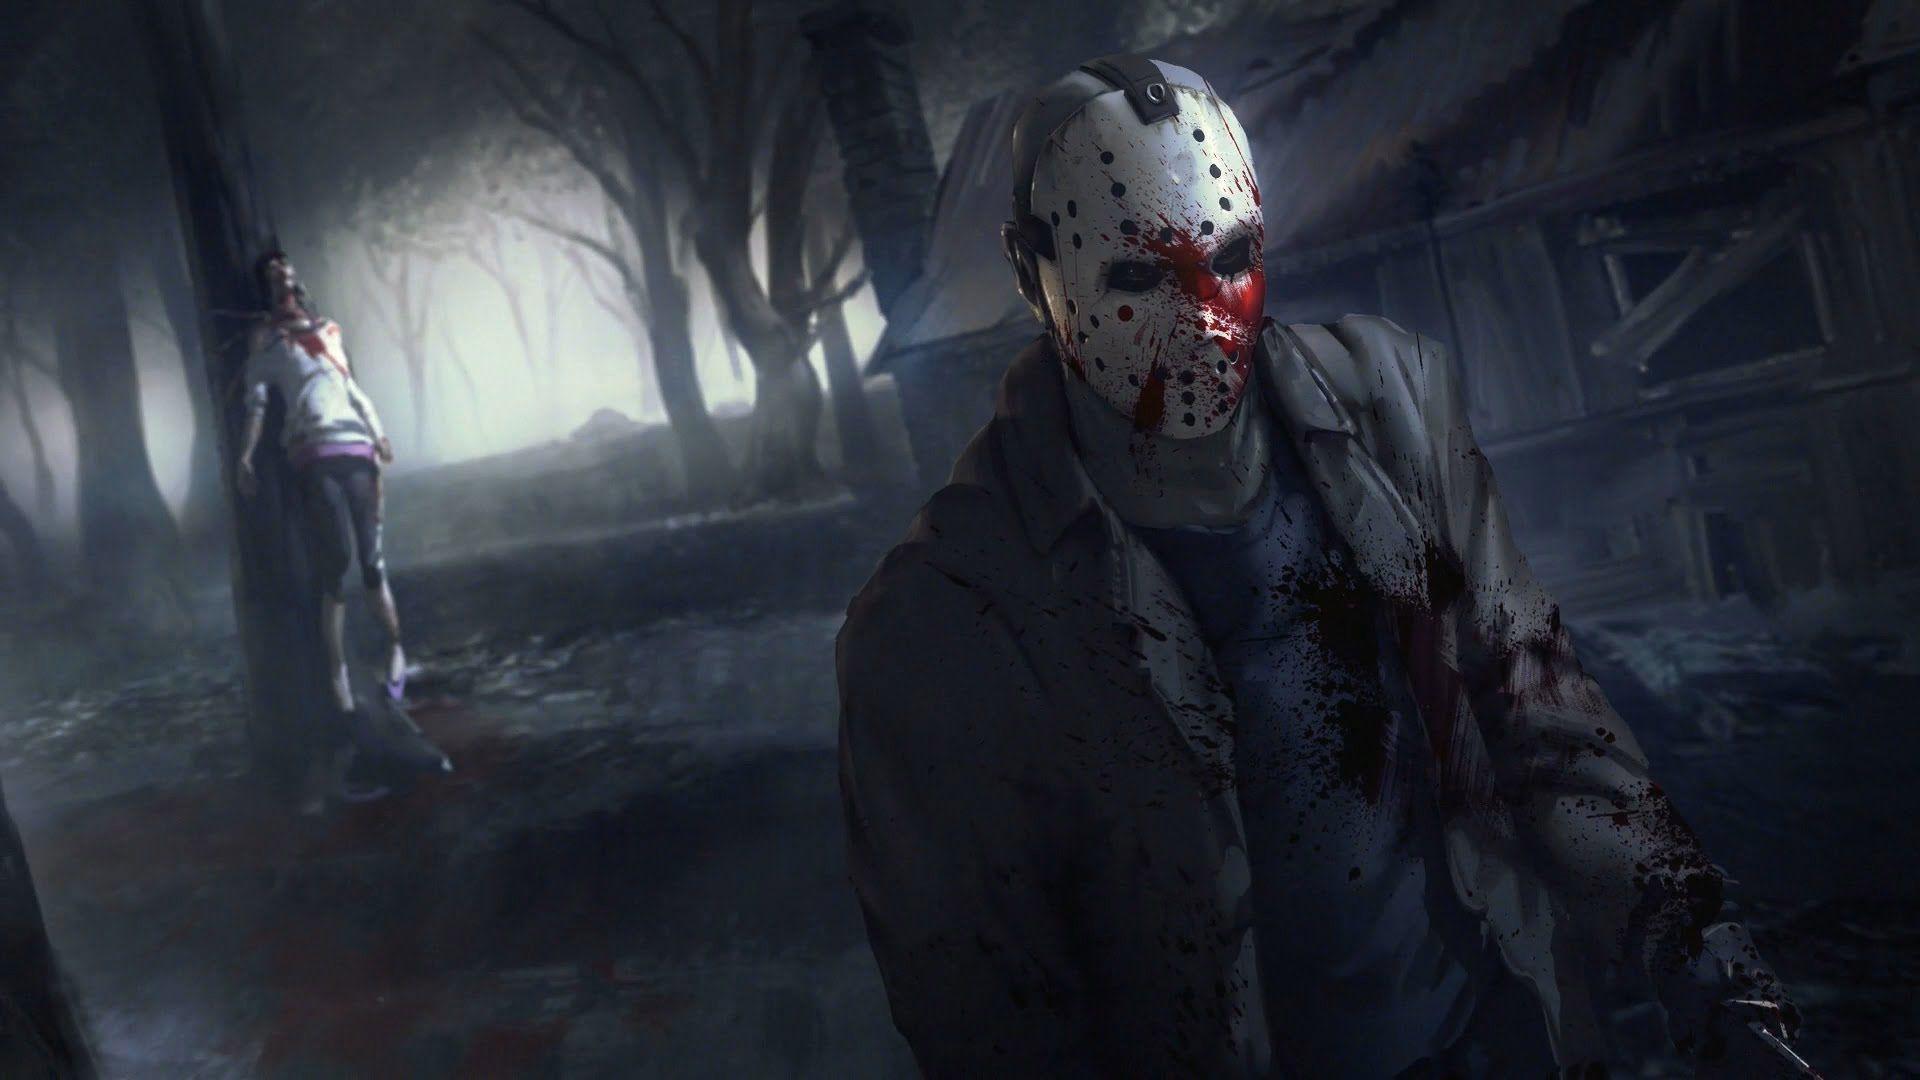 Free Friday the 13th Wallpaper in 1920x1080